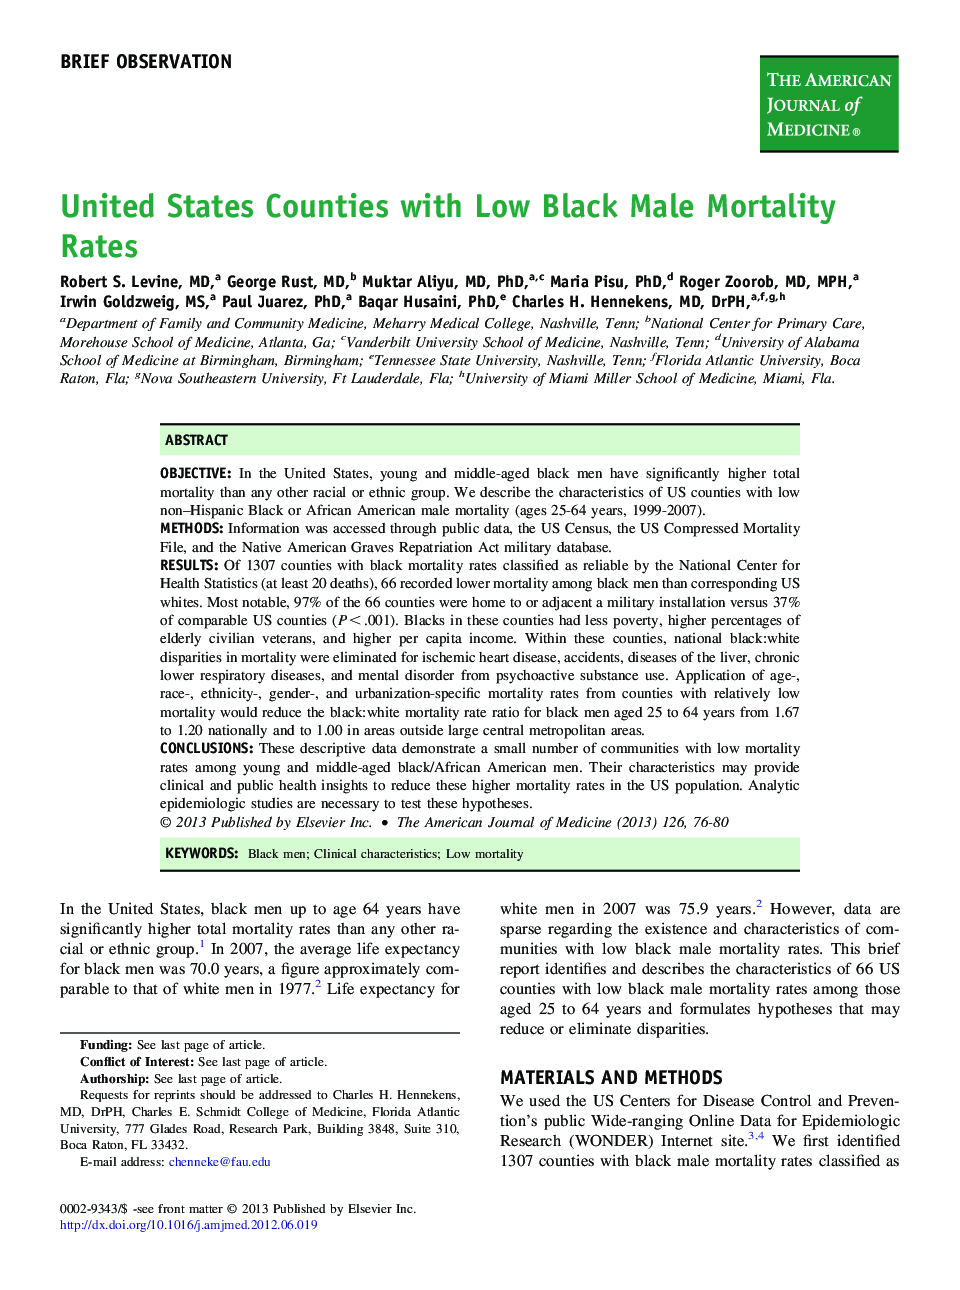 United States Counties with Low Black Male Mortality Rates 